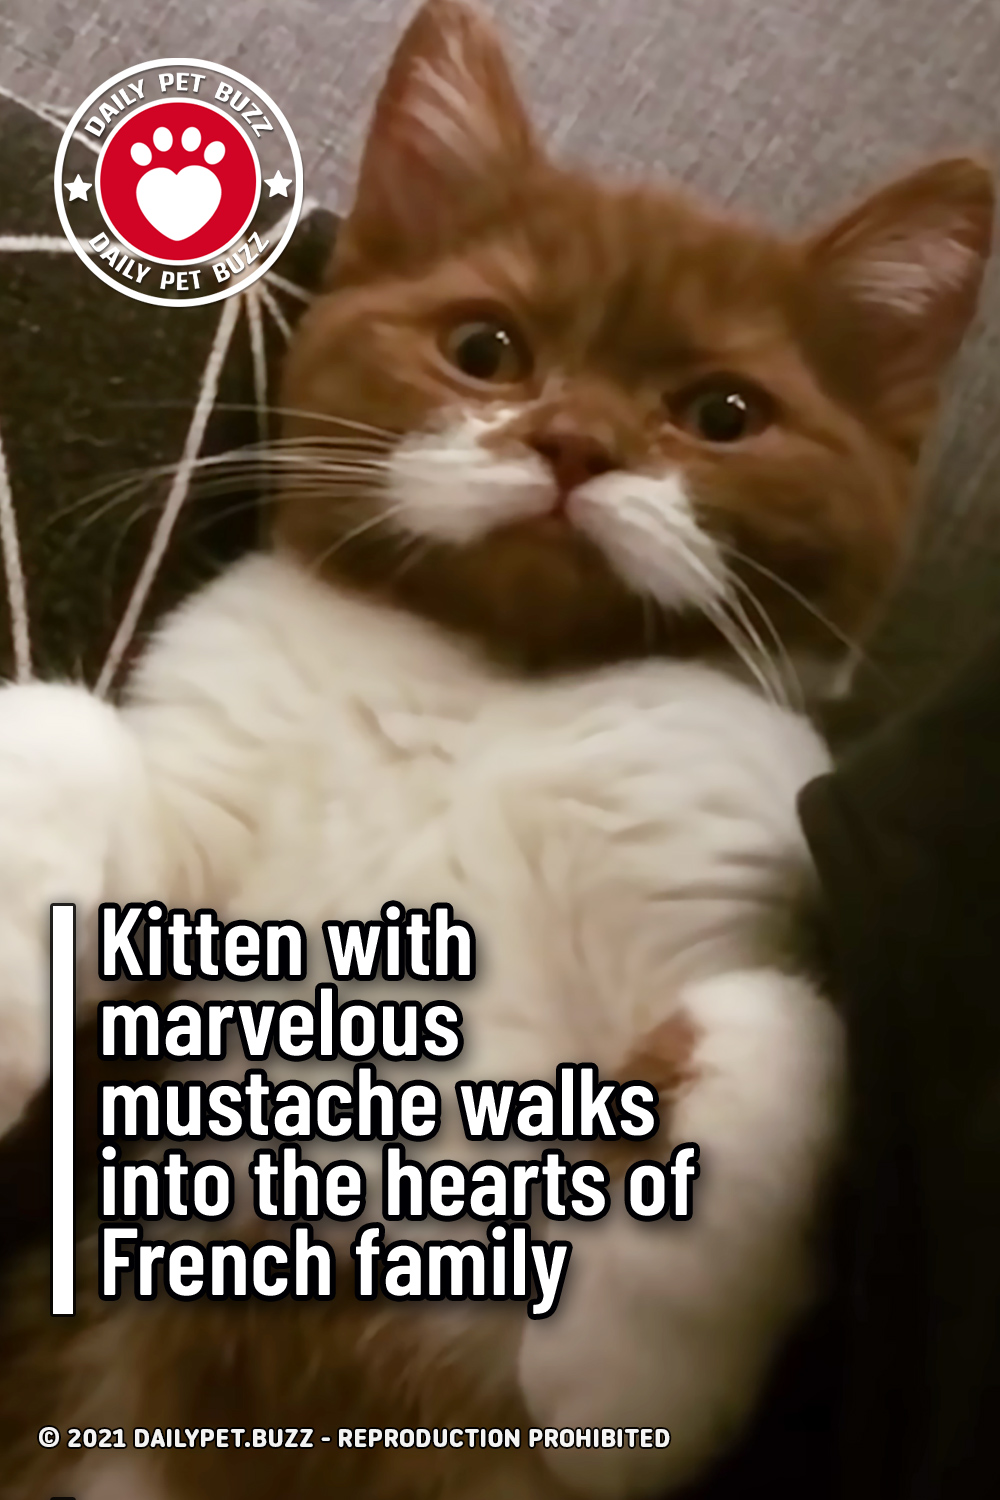 Kitten with marvelous mustache walks into the hearts of French family